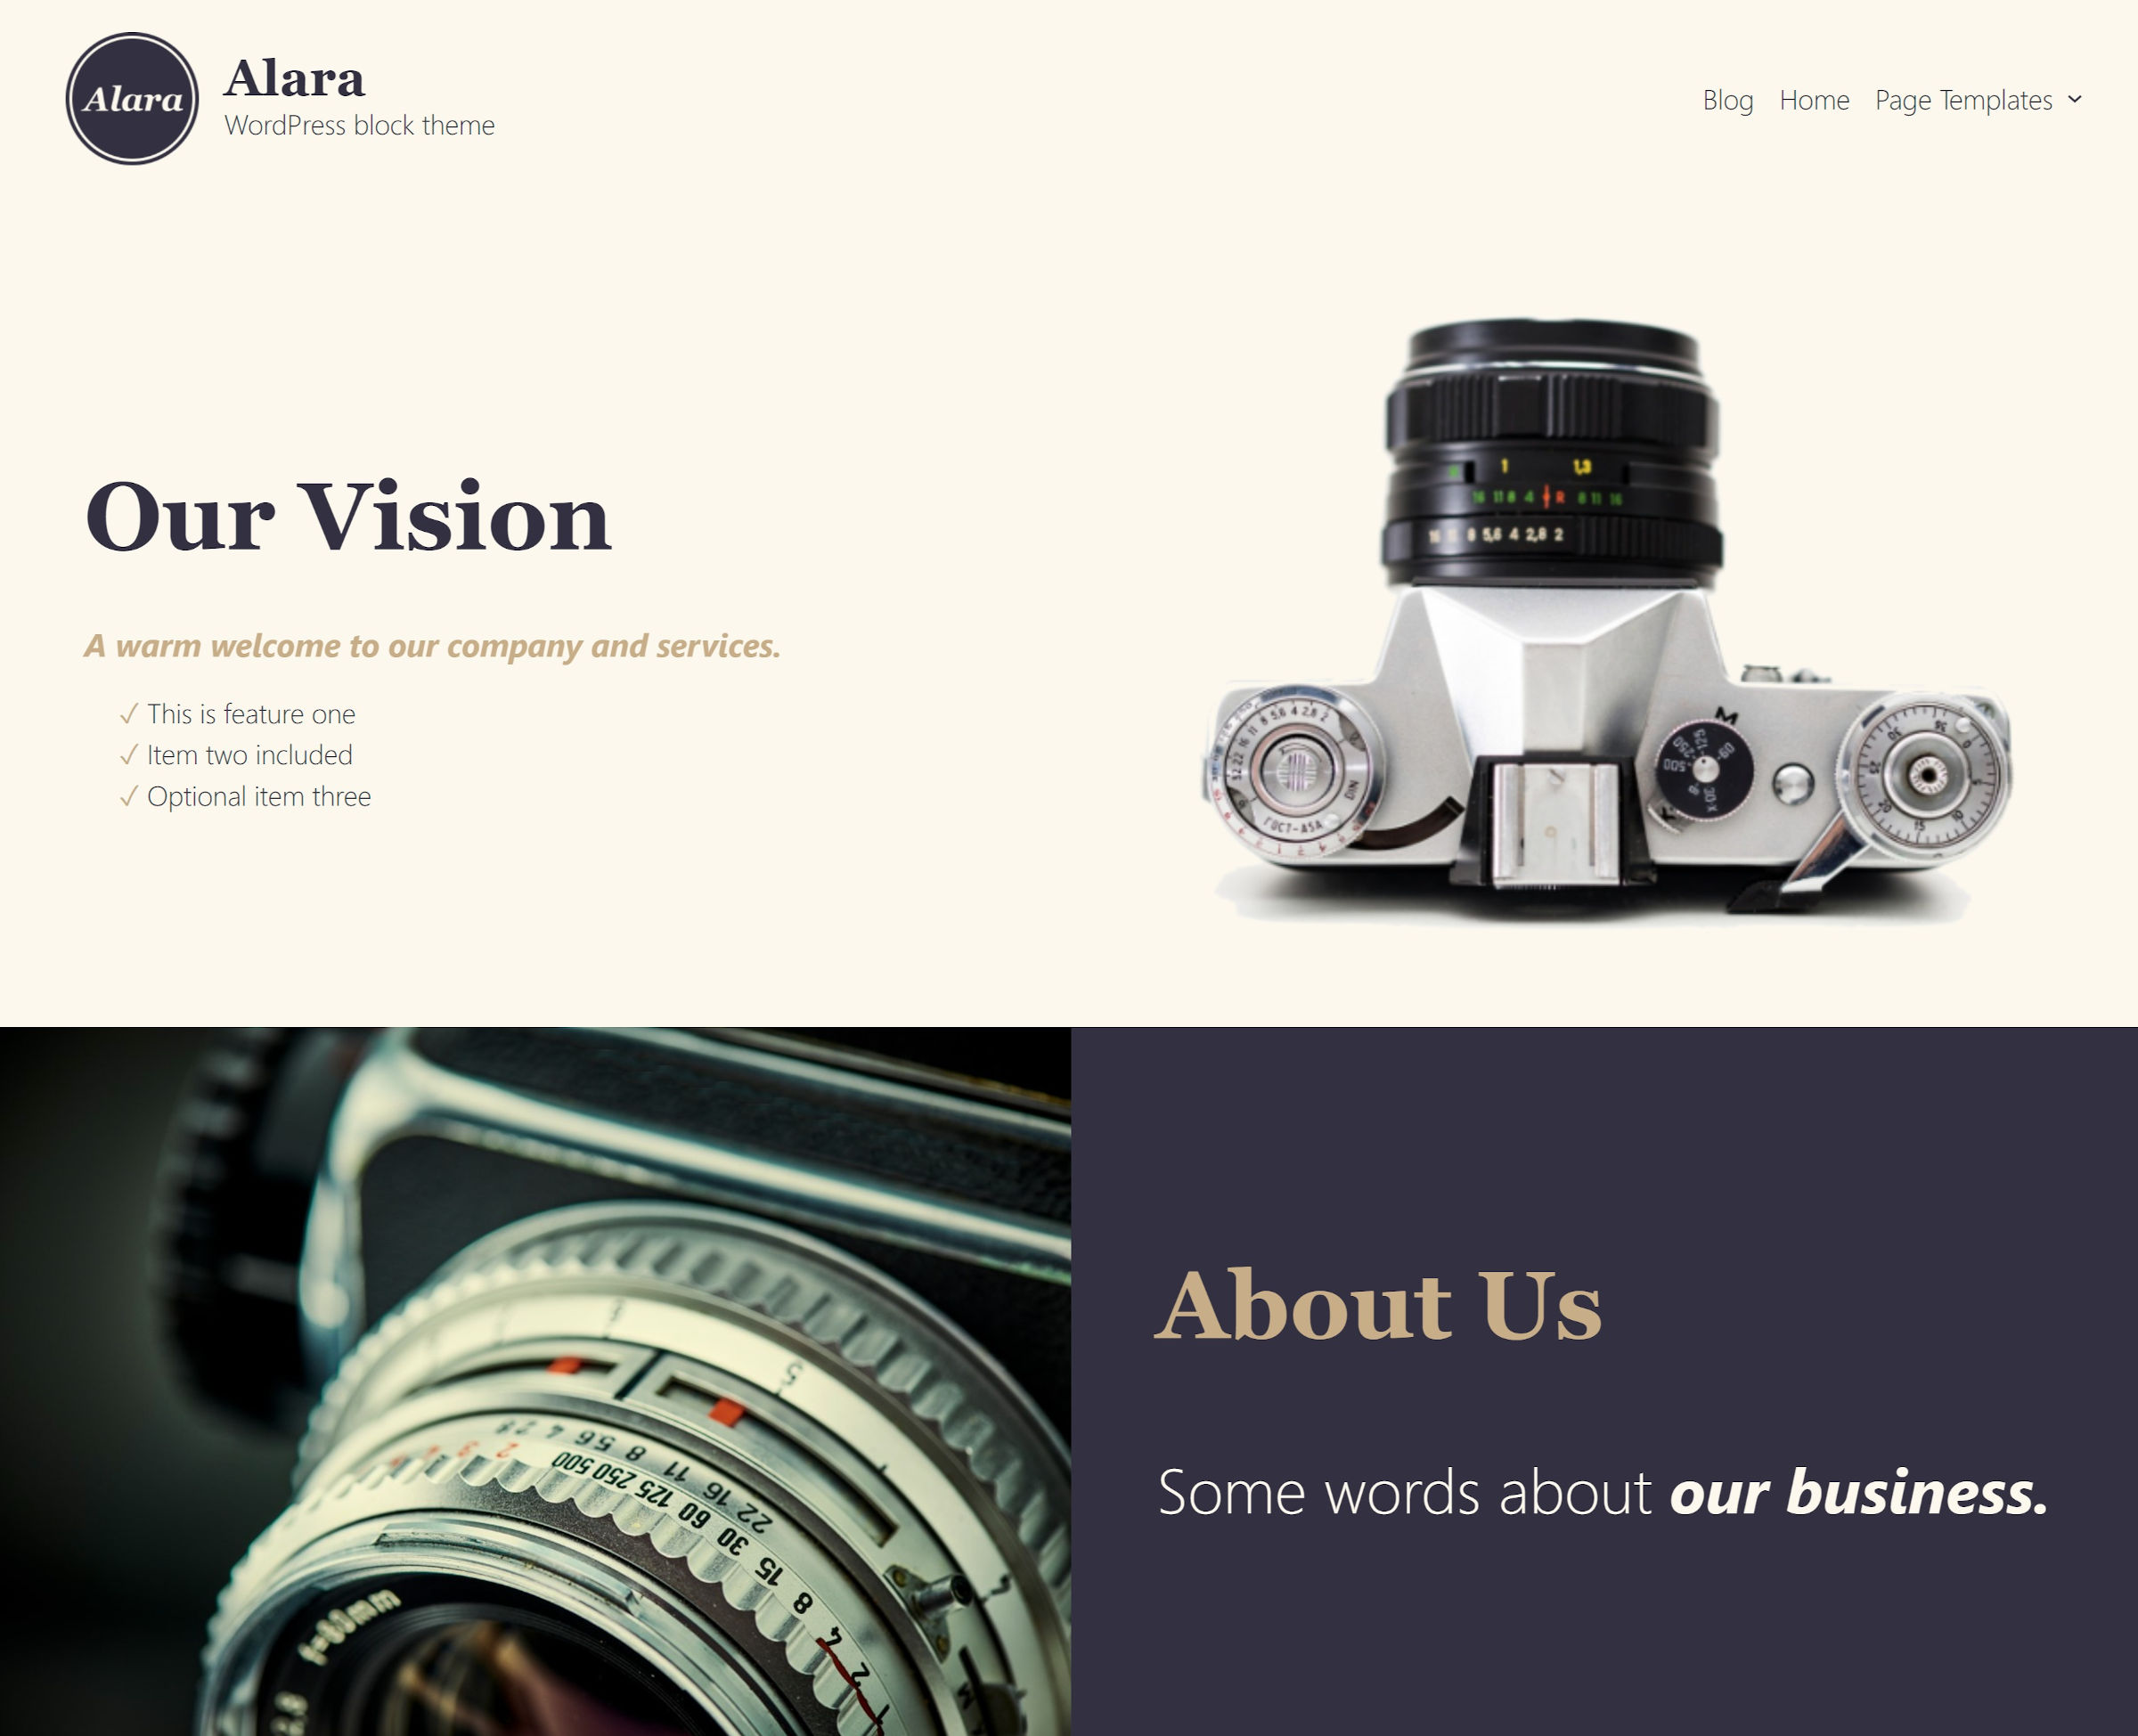 Homepage of the Alara WordPress theme.  It has a full-width header, a intro section with a camera, and an about-us section.